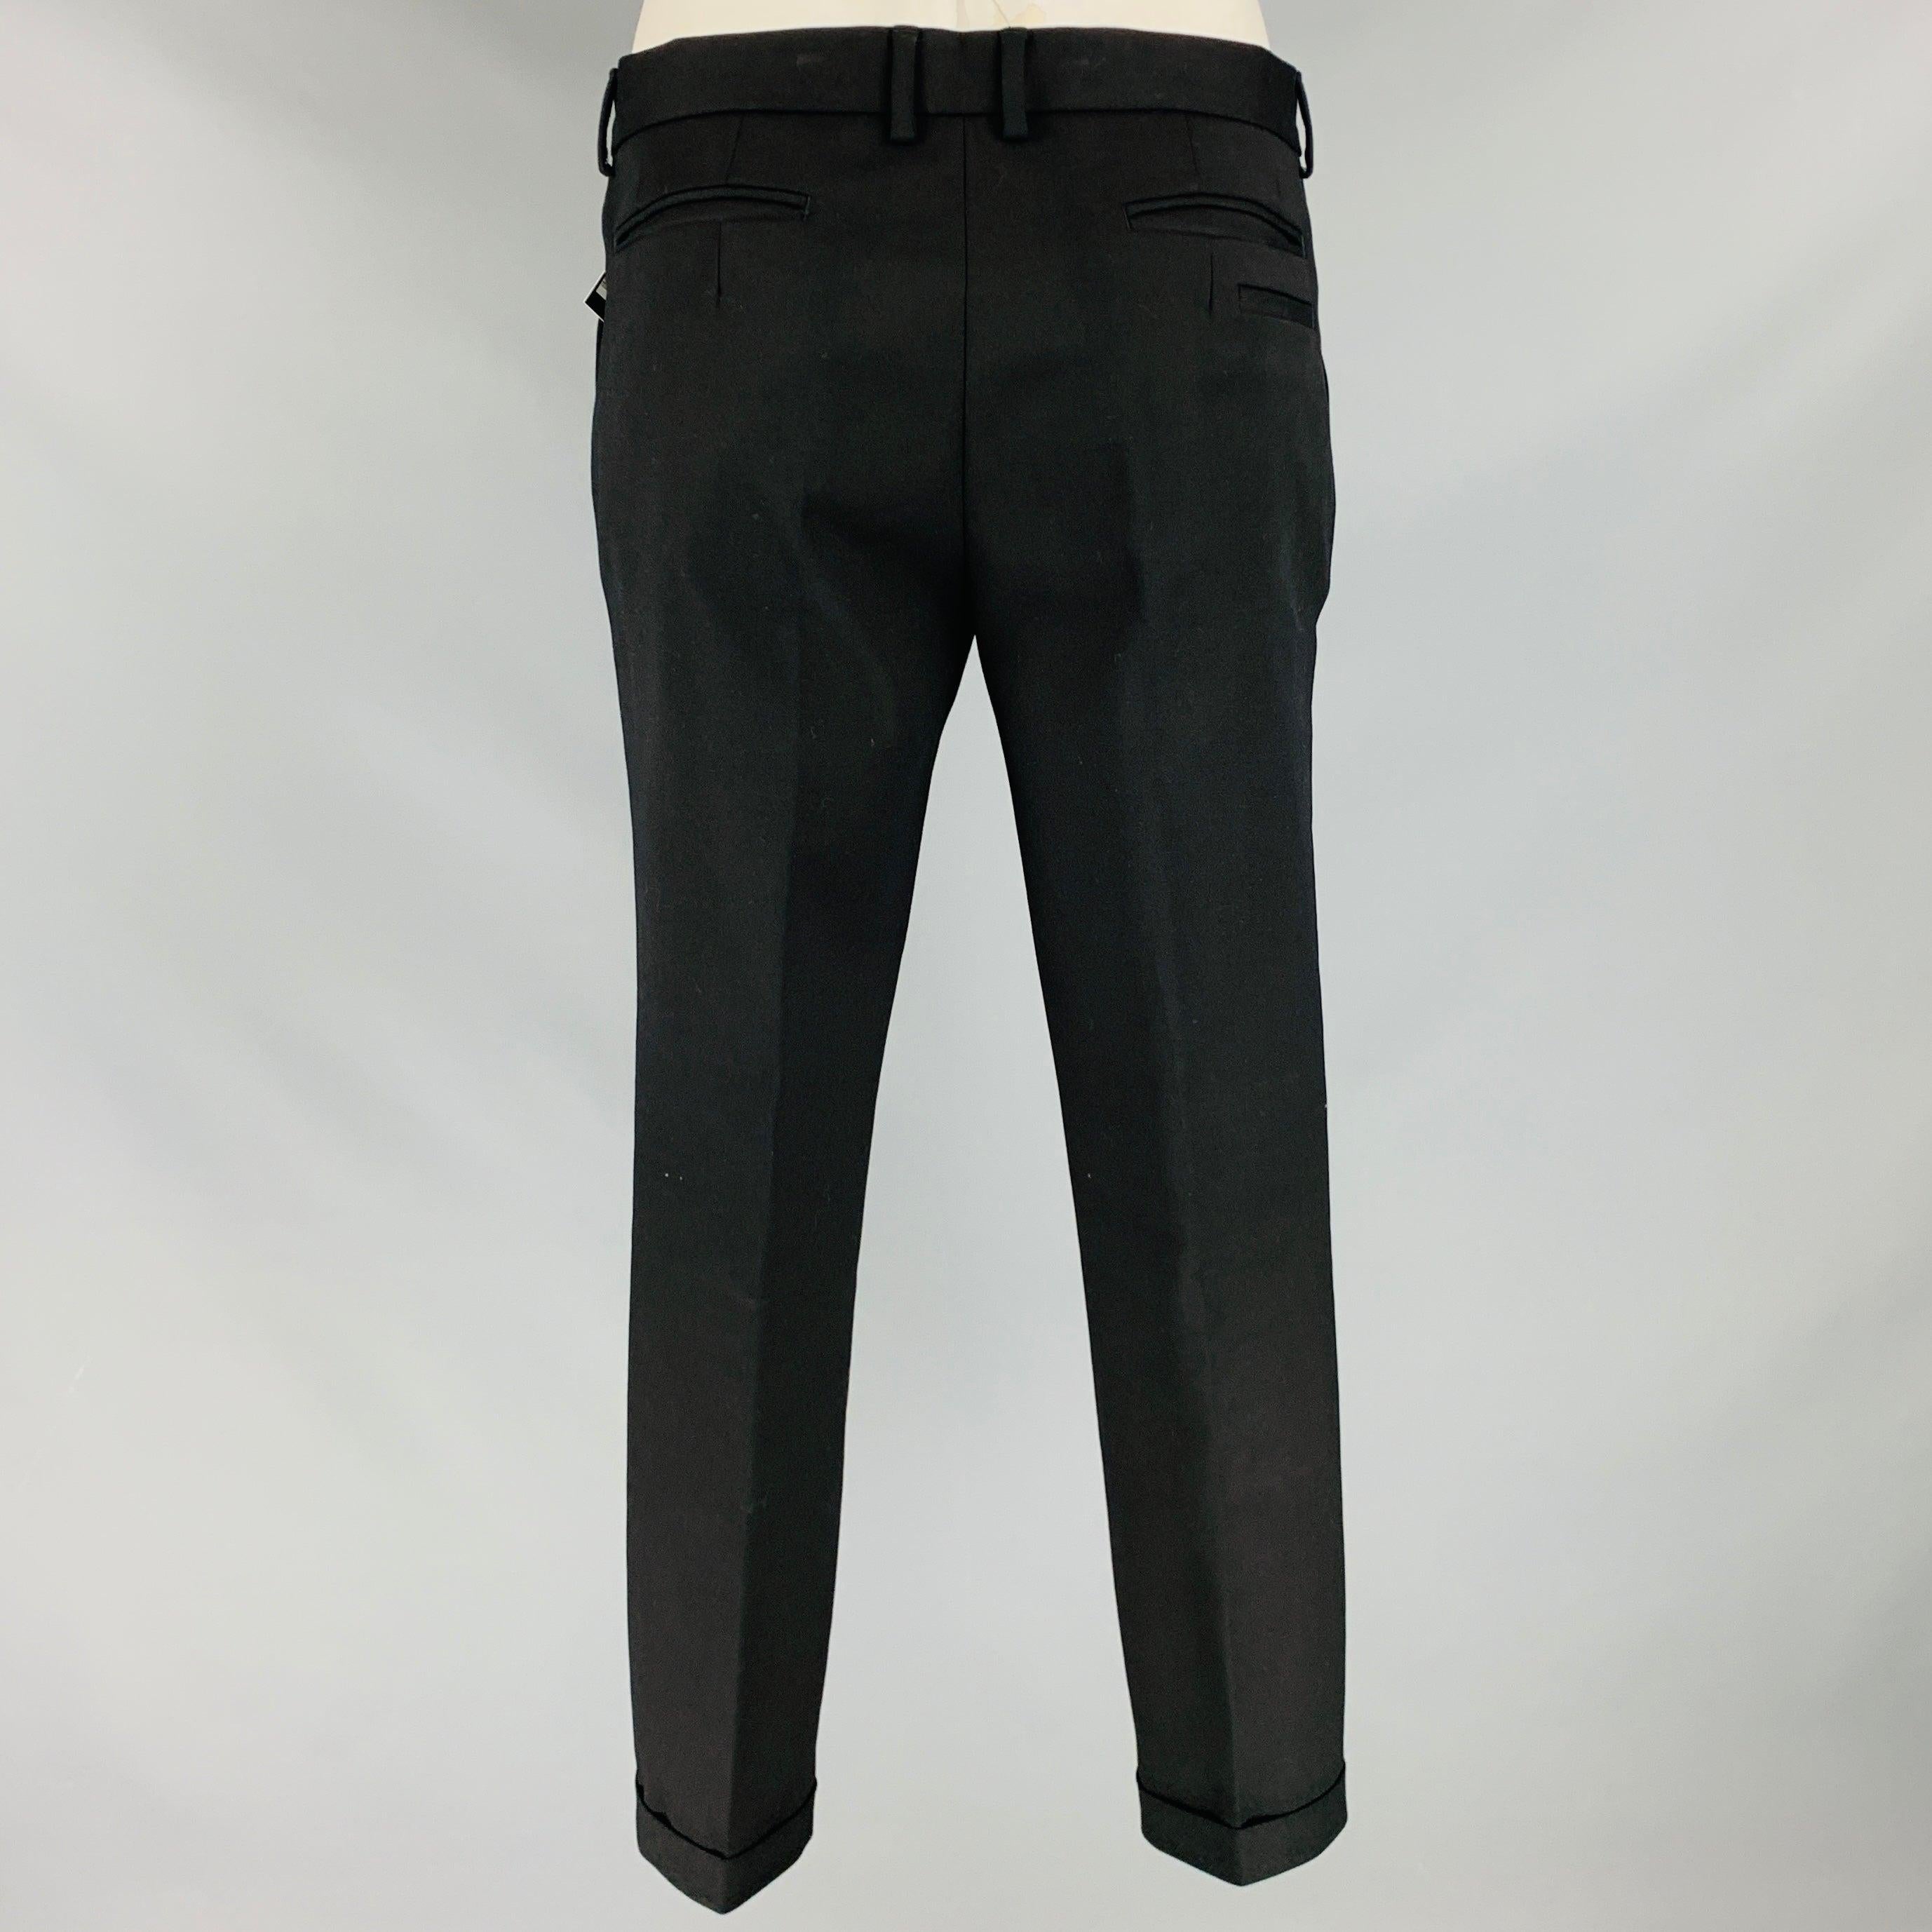 EMPORIO ARMANI dress pants
in a black cotton blend fabric featuring a cuffed style, zip pocket detail with signature logo pull, and zip fly closure. Made in Italy.Excellent Pre-Owned Condition. 

Marked:   IT 50 

Measurements: 
  Waist: 34 inches